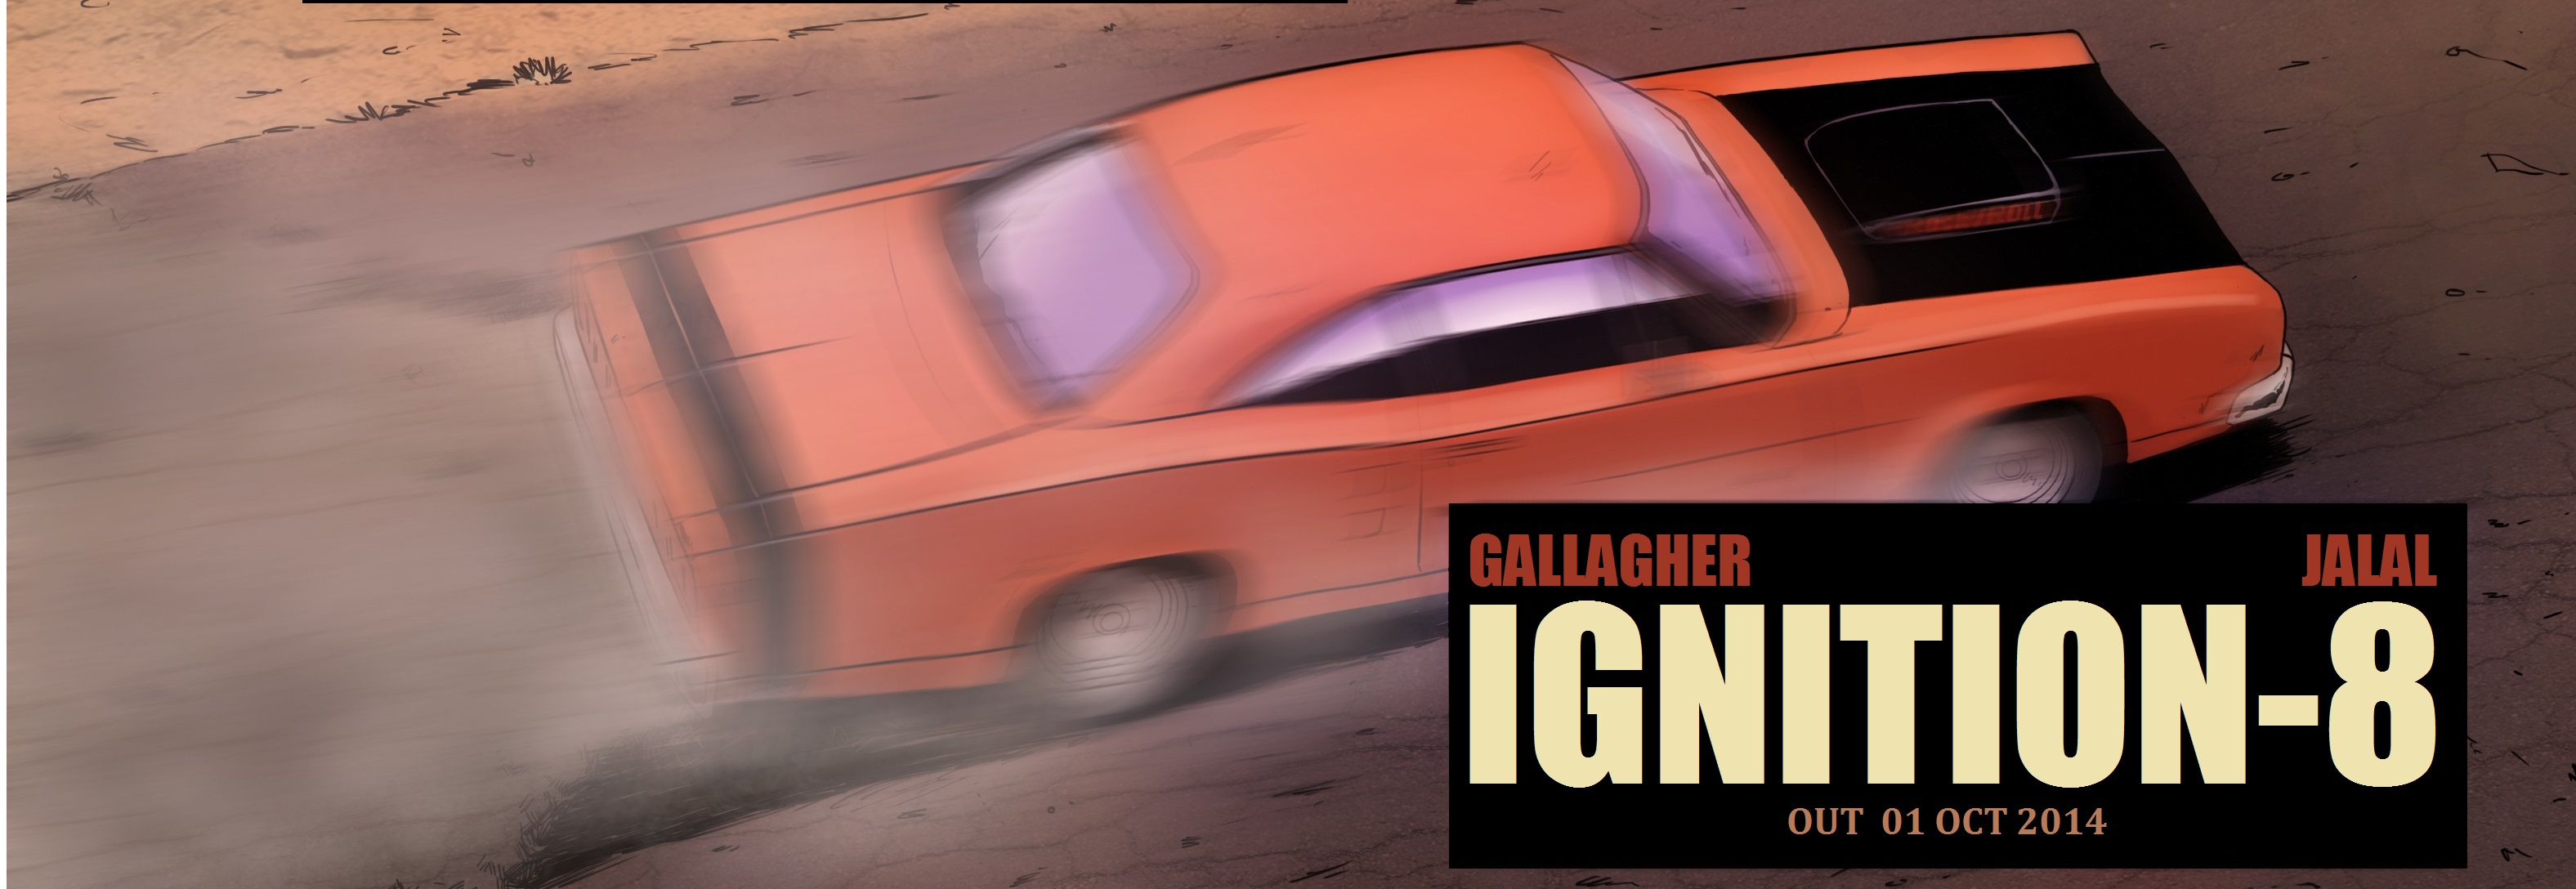 The official date has been set. 01OCT14 - The hard hitting Road Graphic Novel 